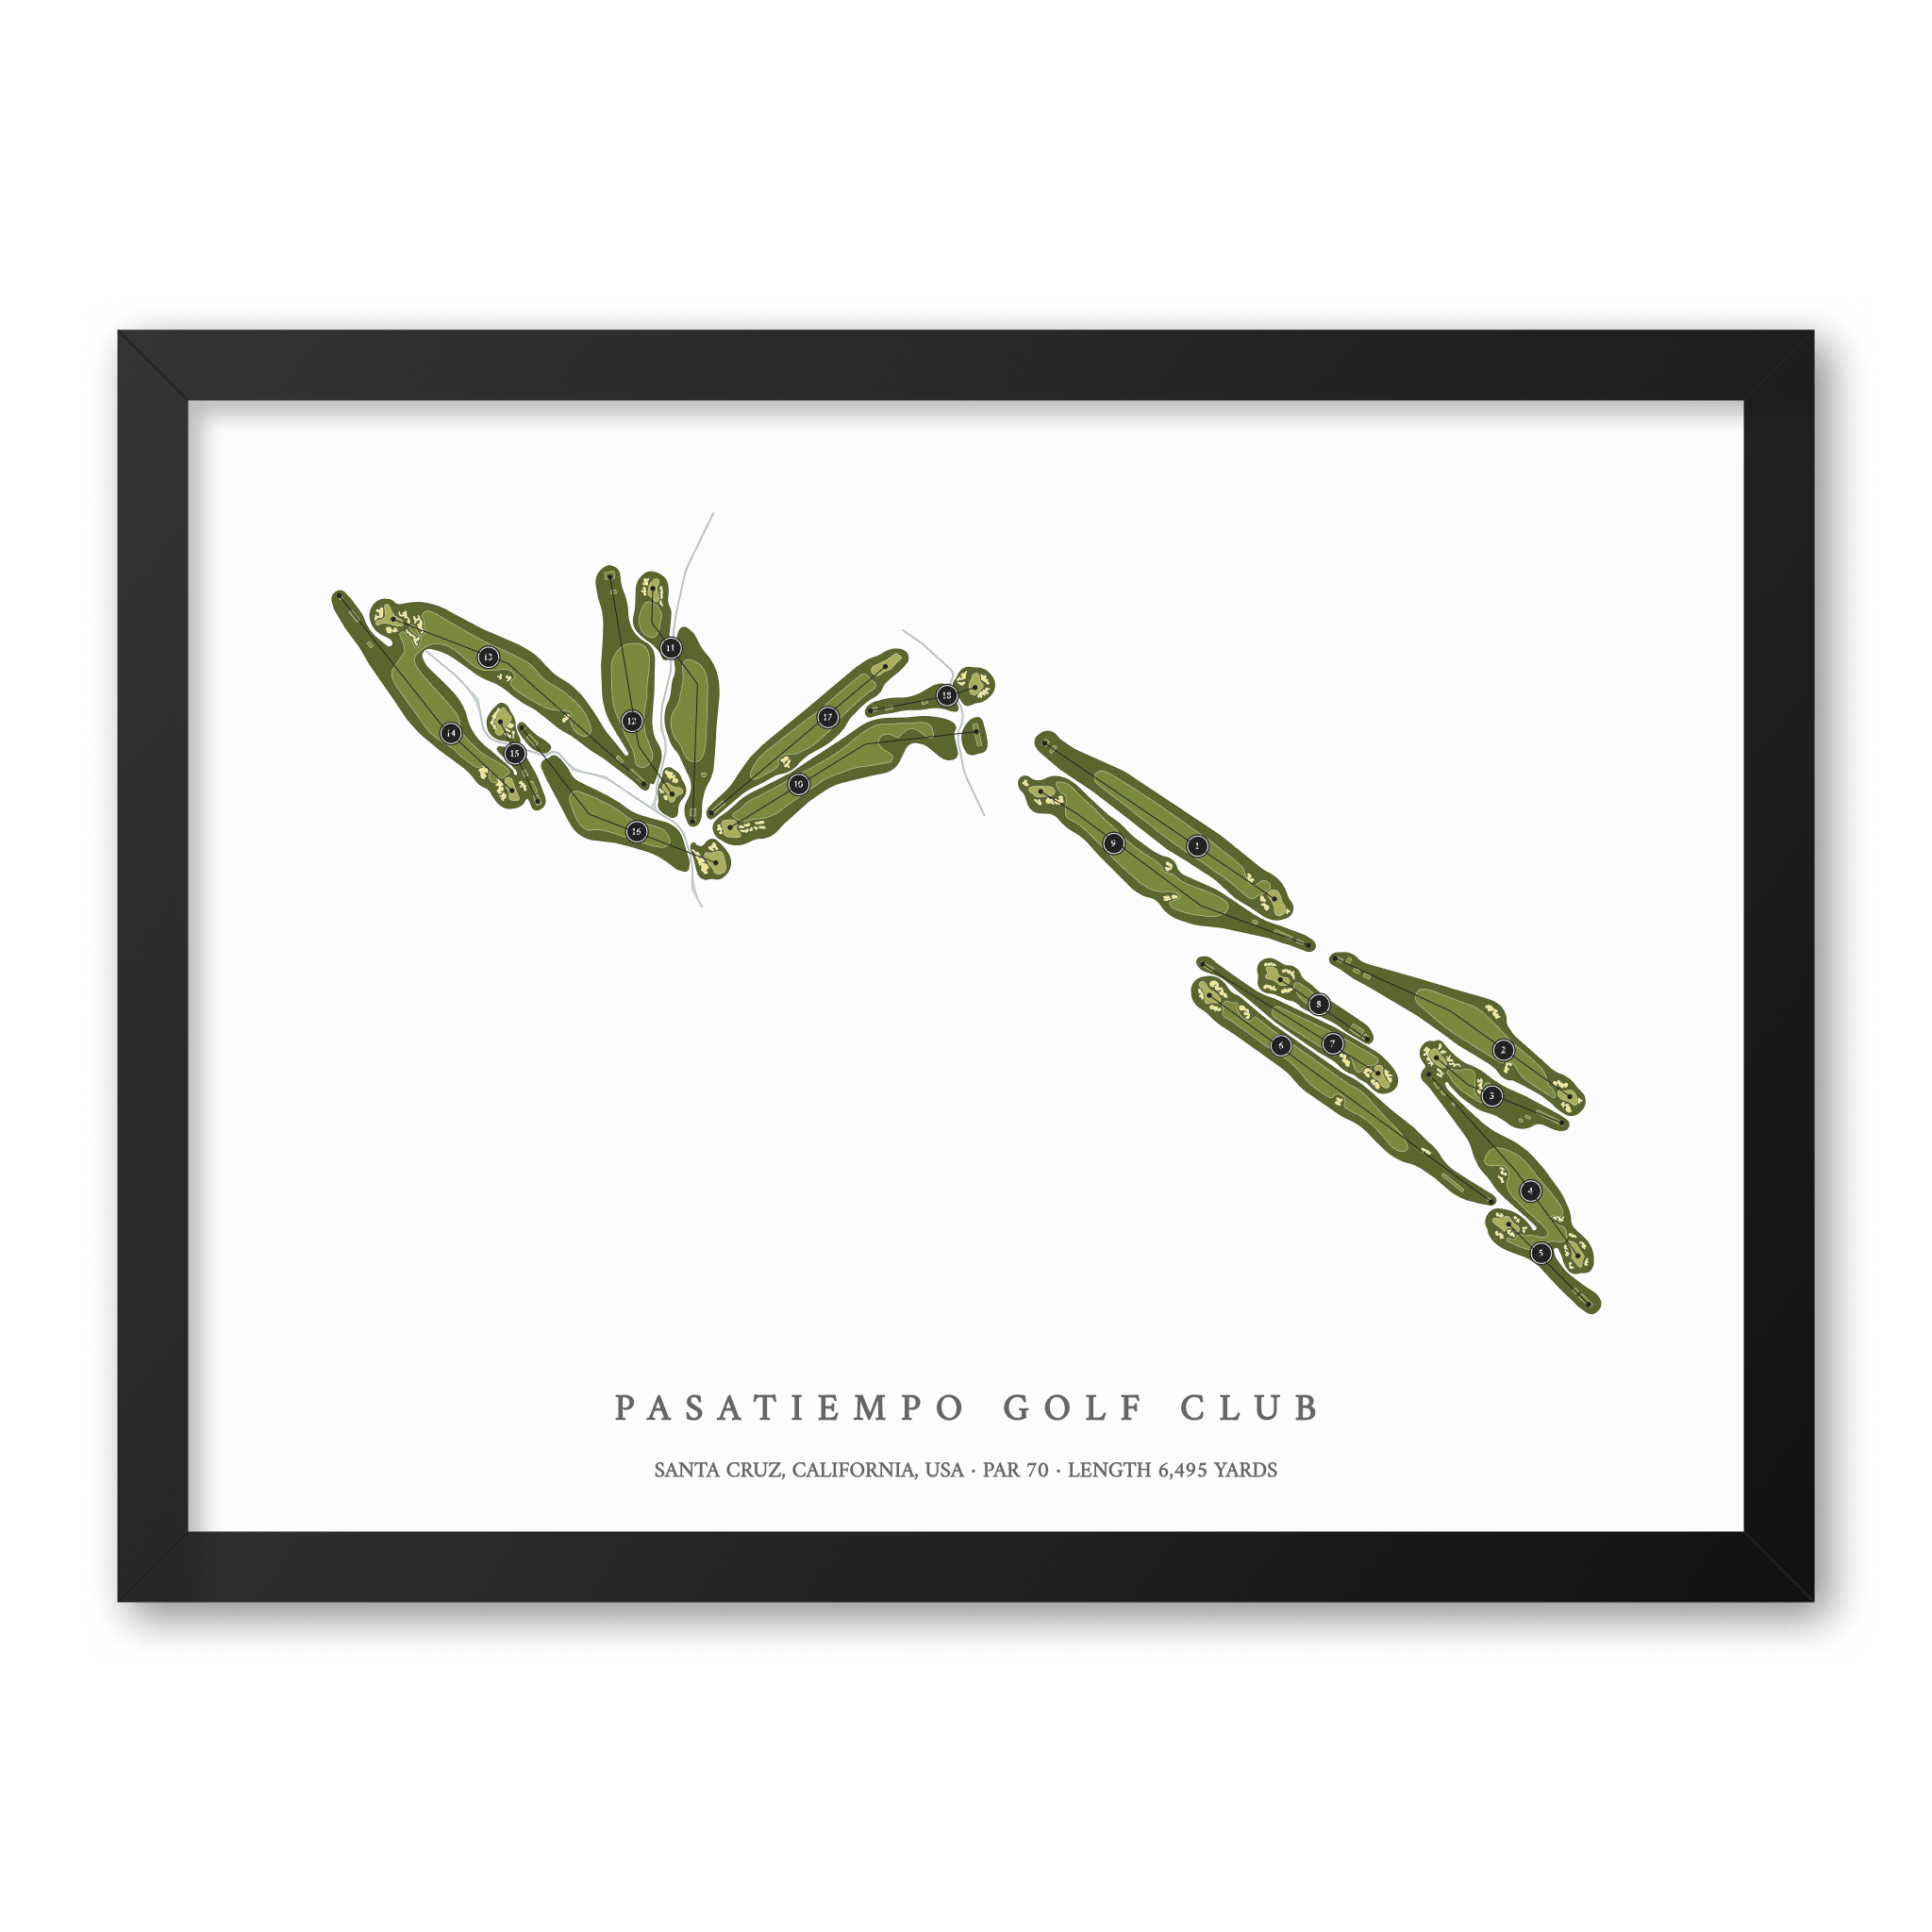 Pasatiempo Golf Club| Golf Course Print | Black Frame With Hole Numbers #hole numbers_yes